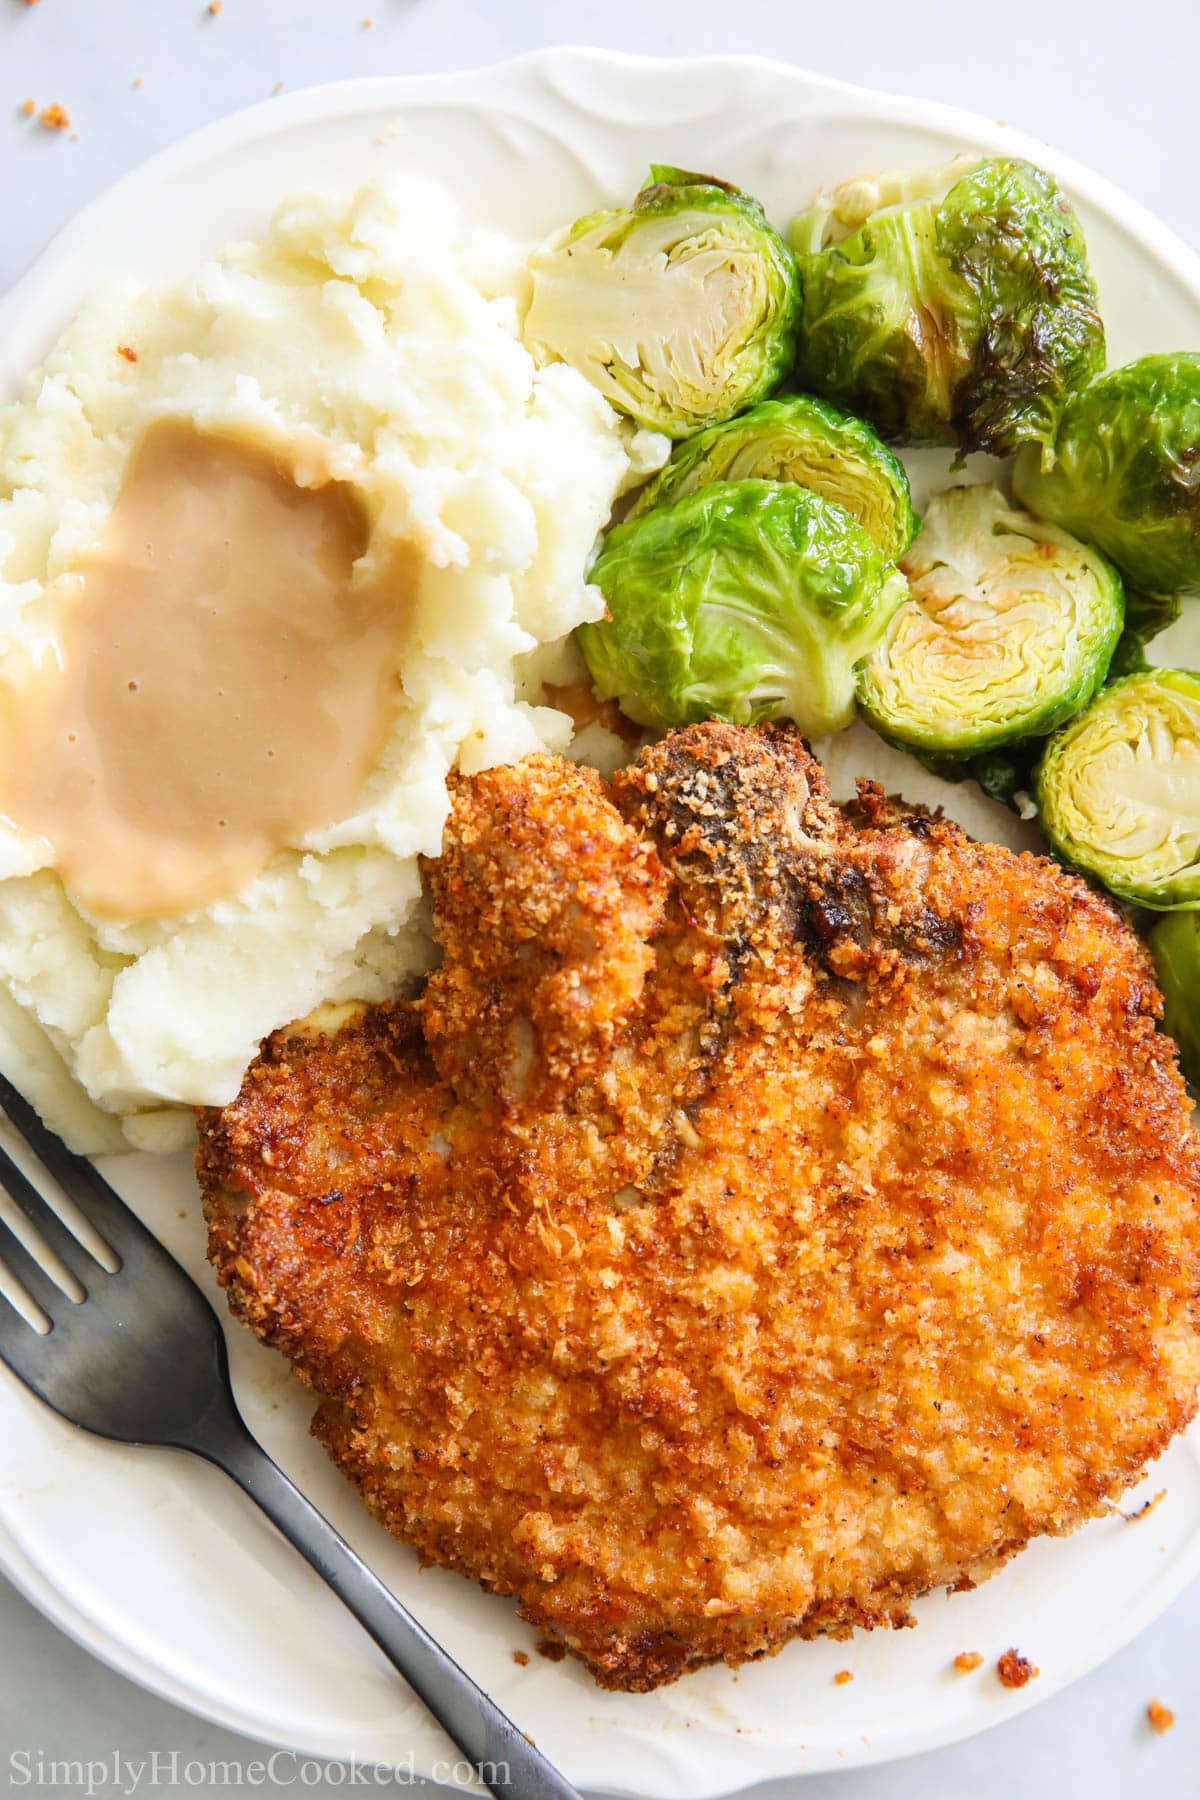 Plate of Air Fryer Pork Chops with mashed potatoes, brussels sprouts, and a fork